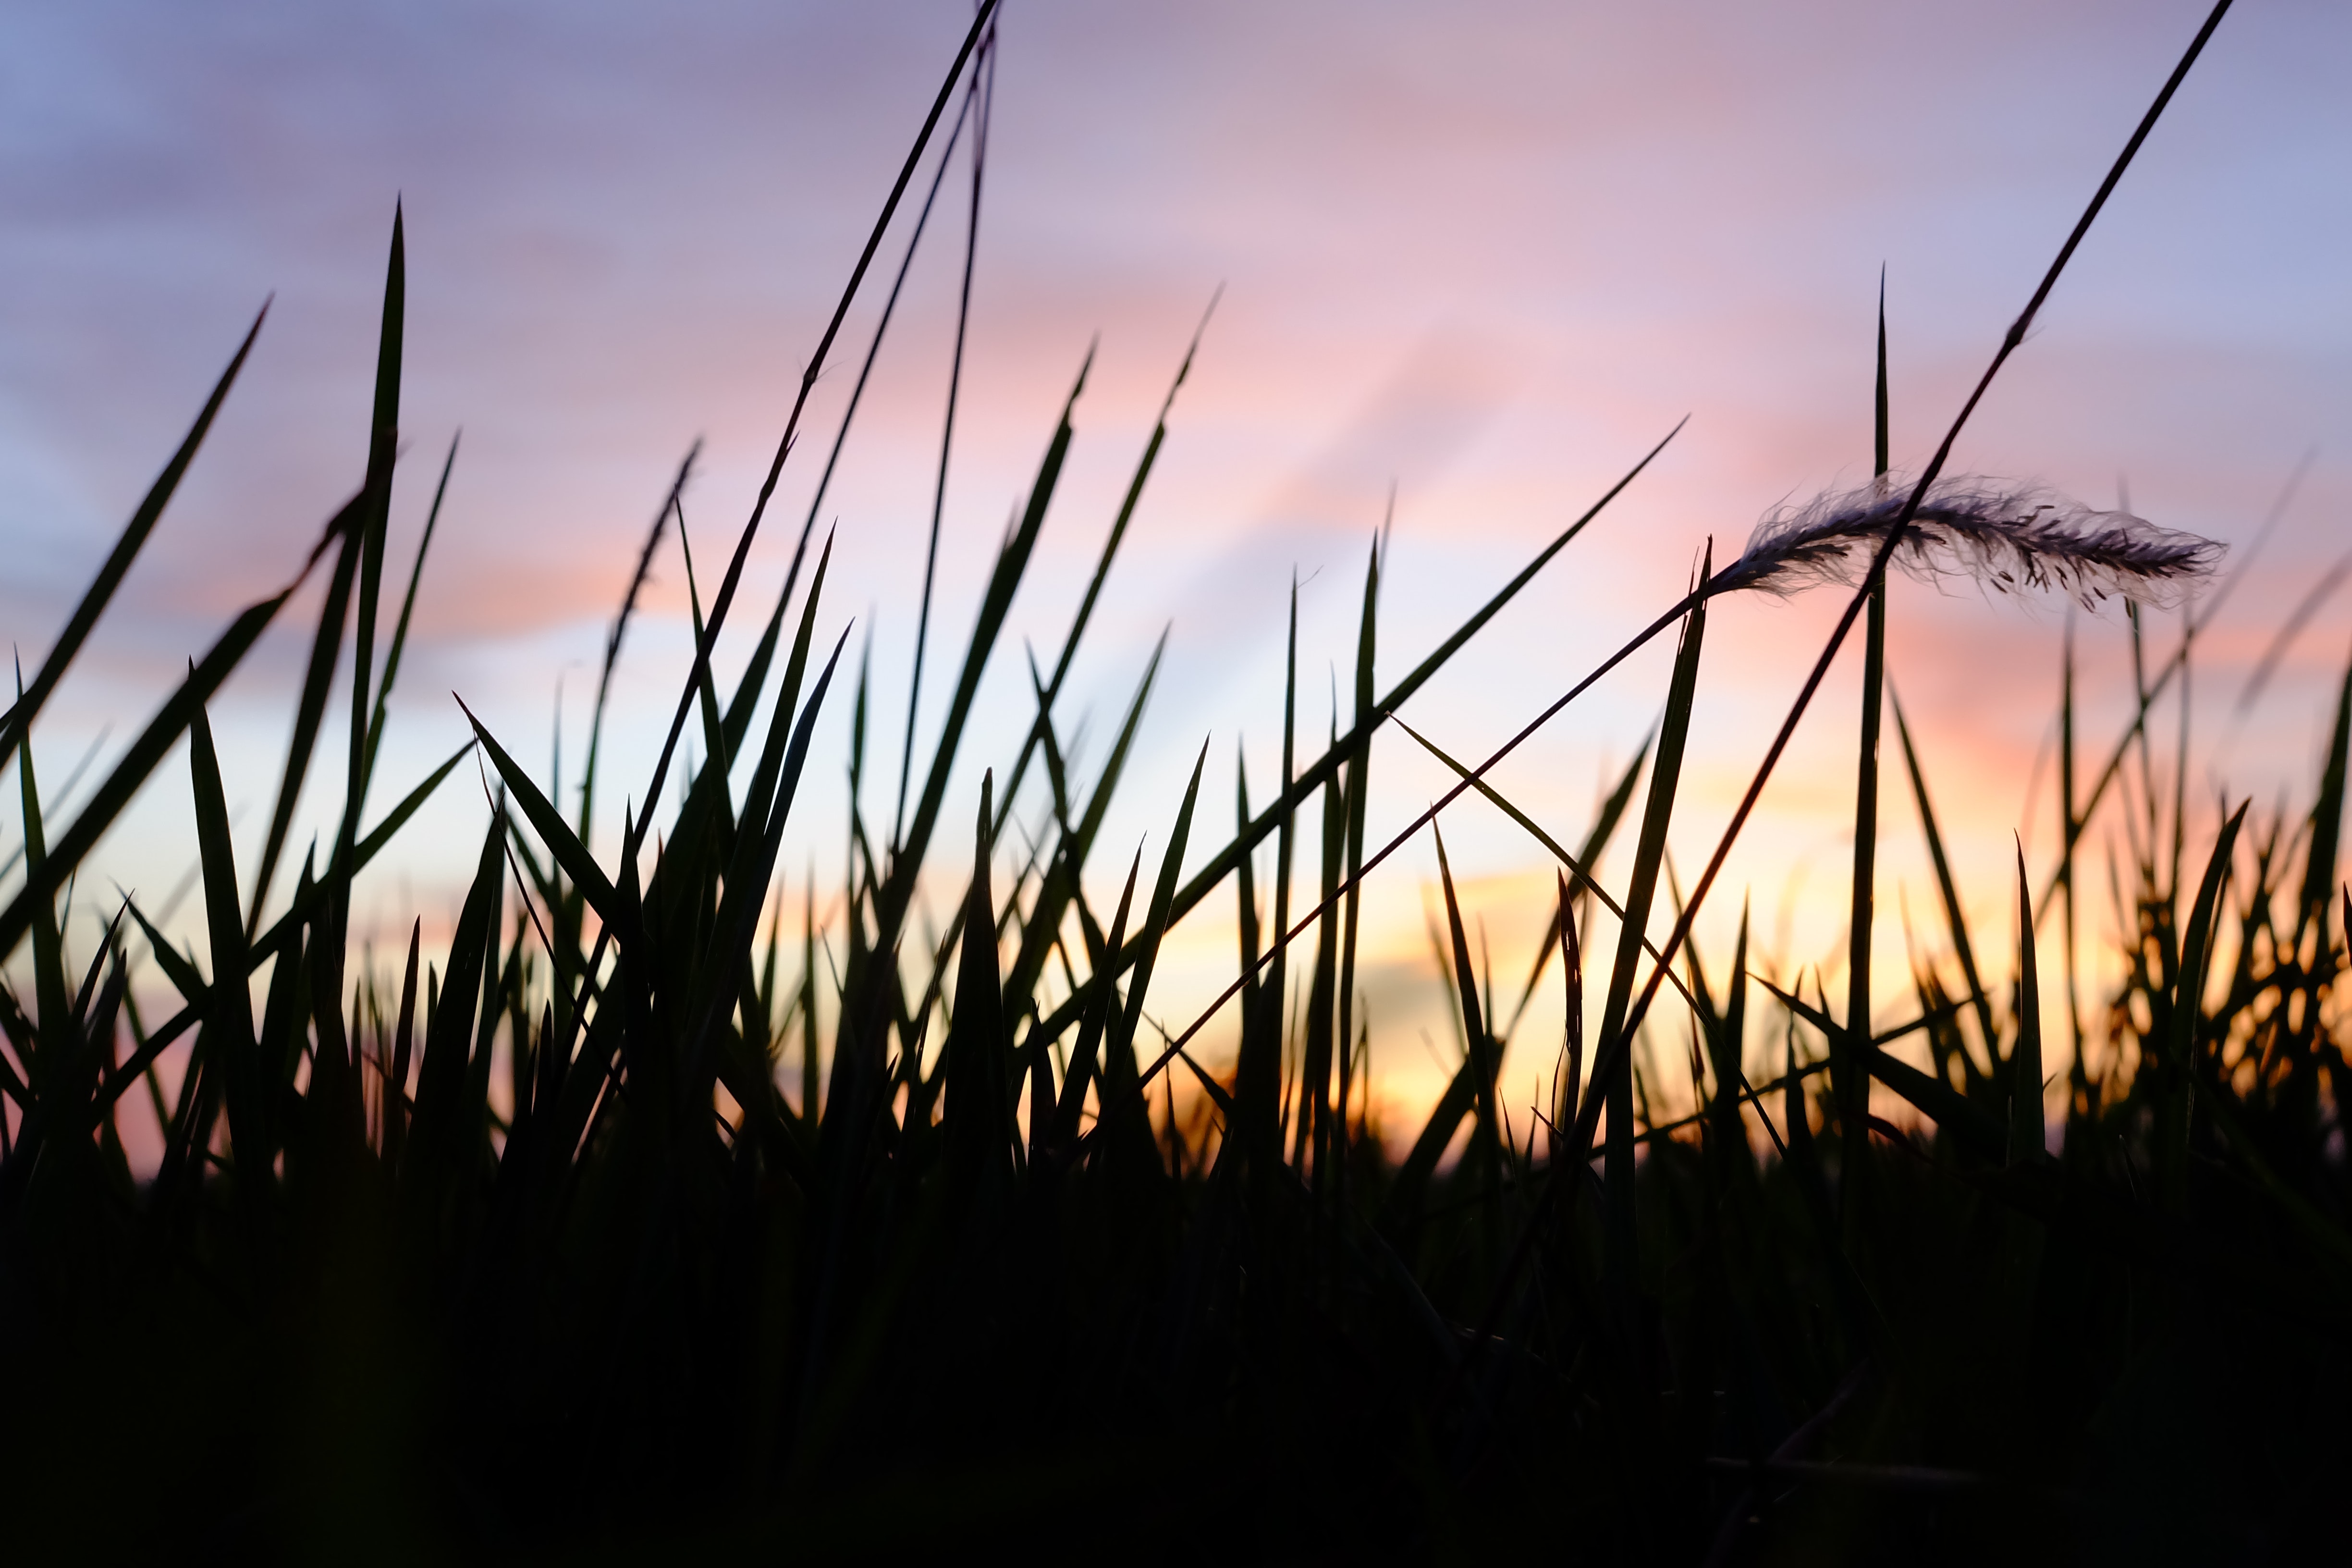 Depth of field photo of grass silhouette during golden hour